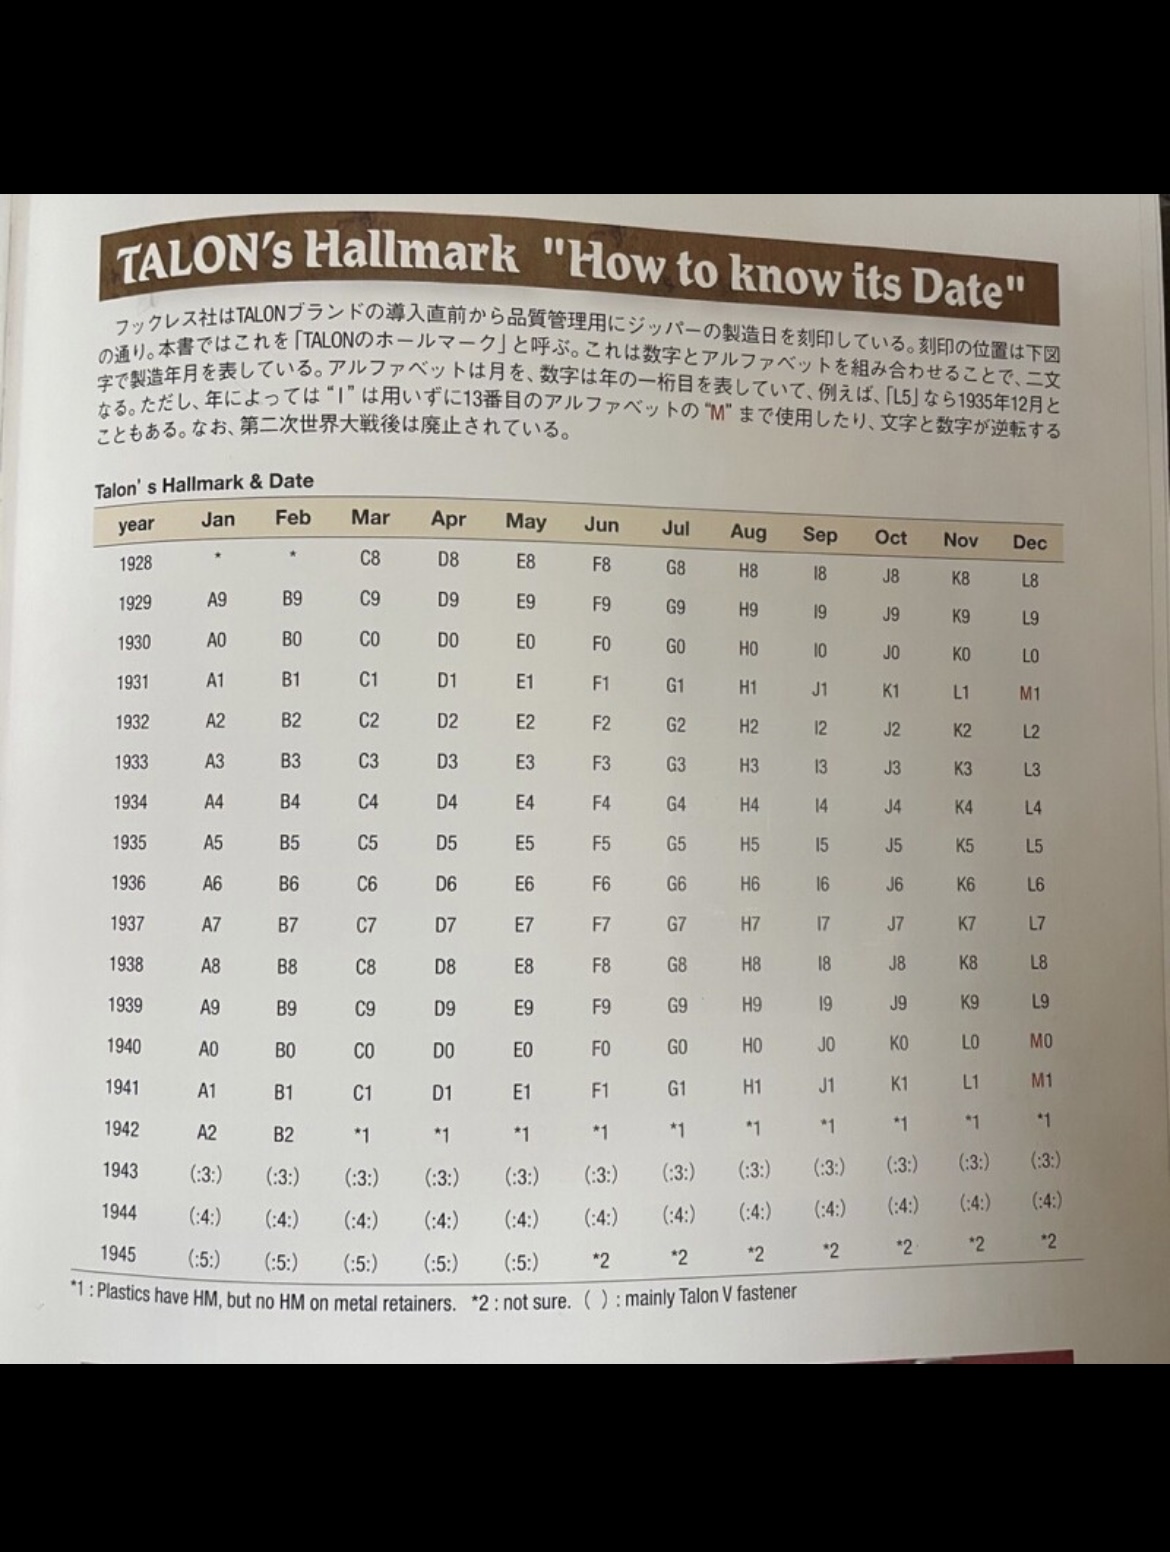 A Guide to dating Talon Zippers (updated and revised)